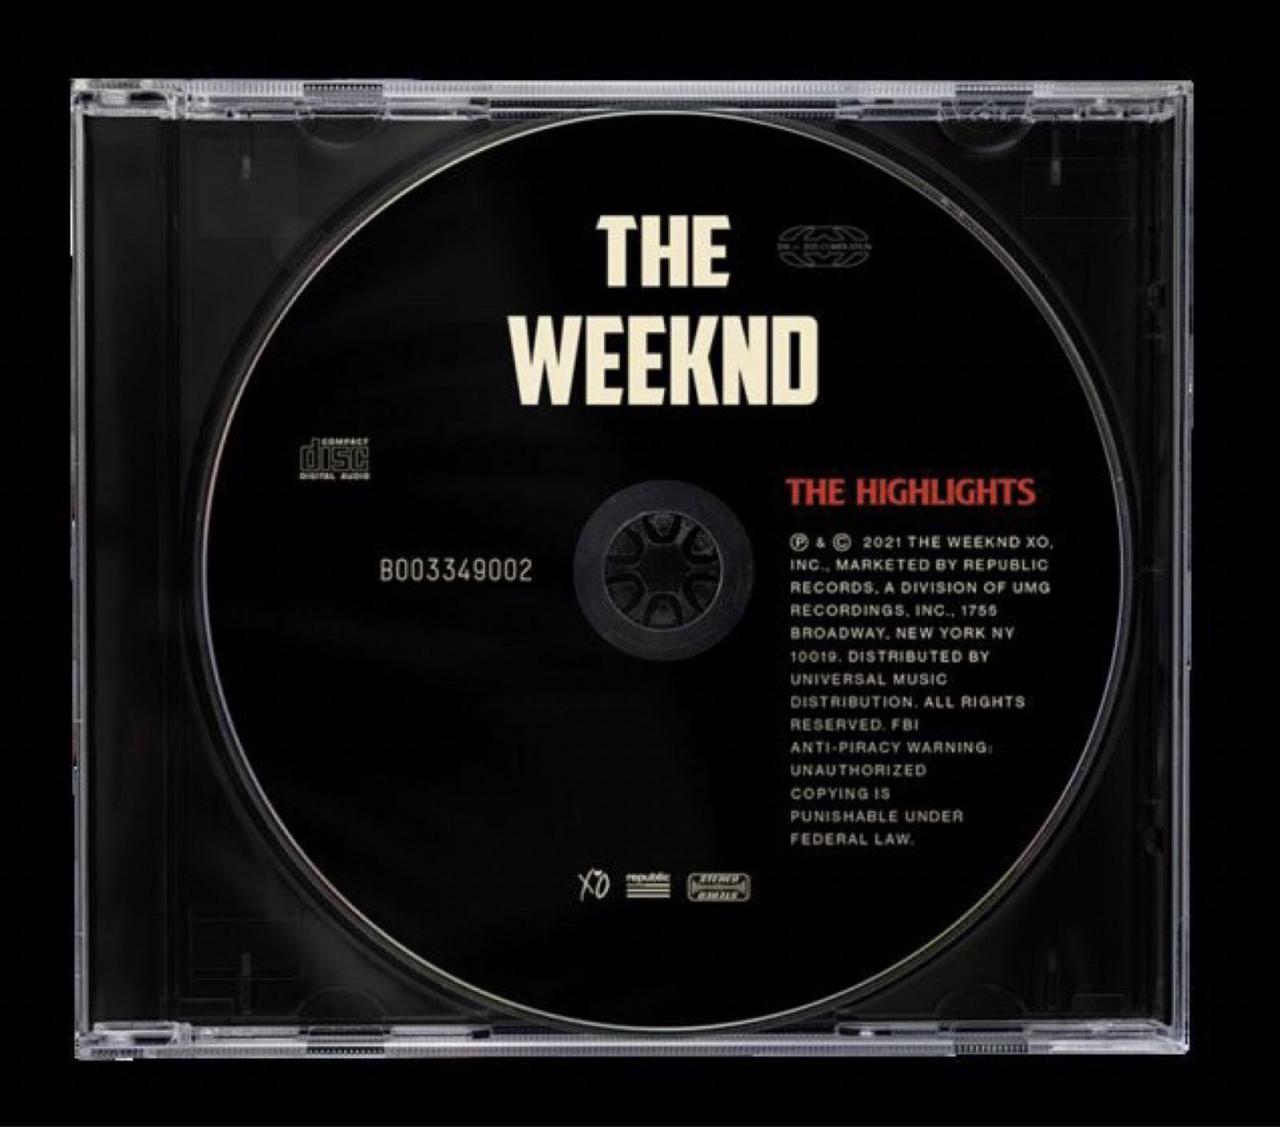 the weeknd starboy album mp3 free download